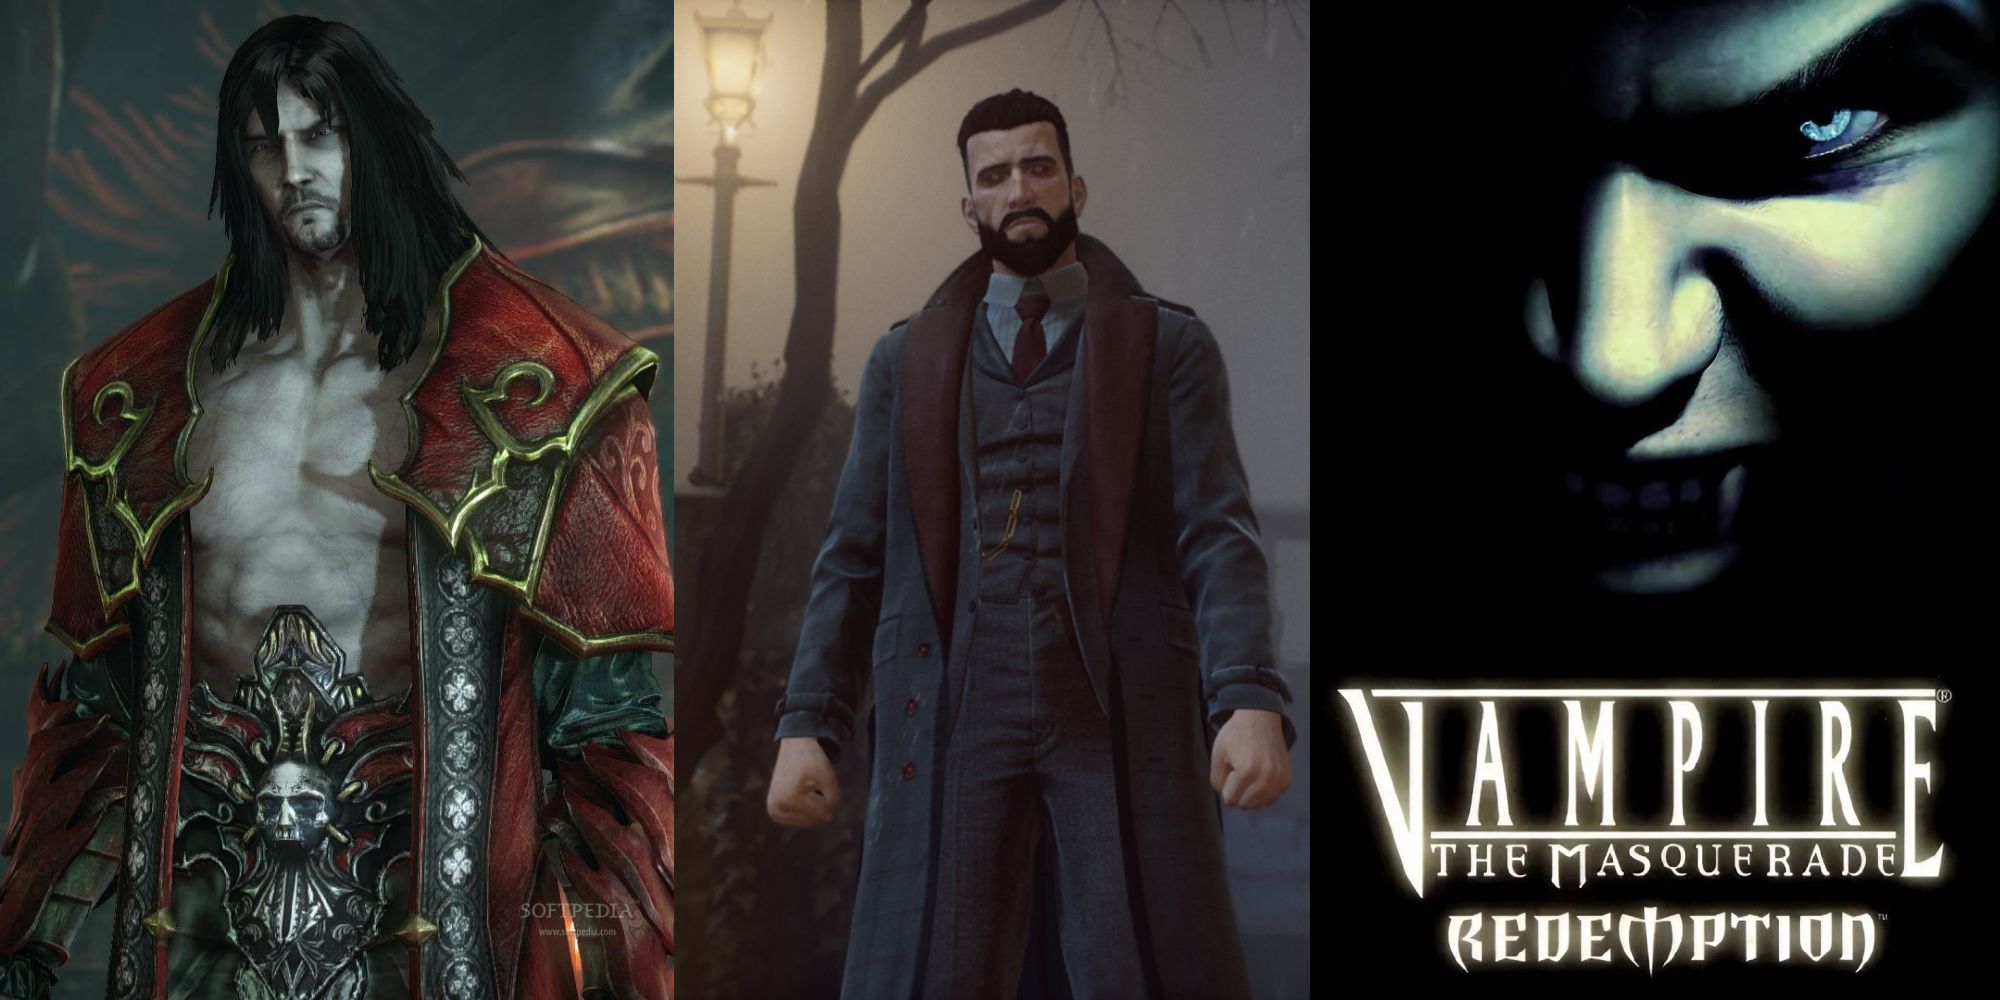 Split image featuring images from the game Castlevania, Vampyr, and Vampire: The Masquerade - Redemption.